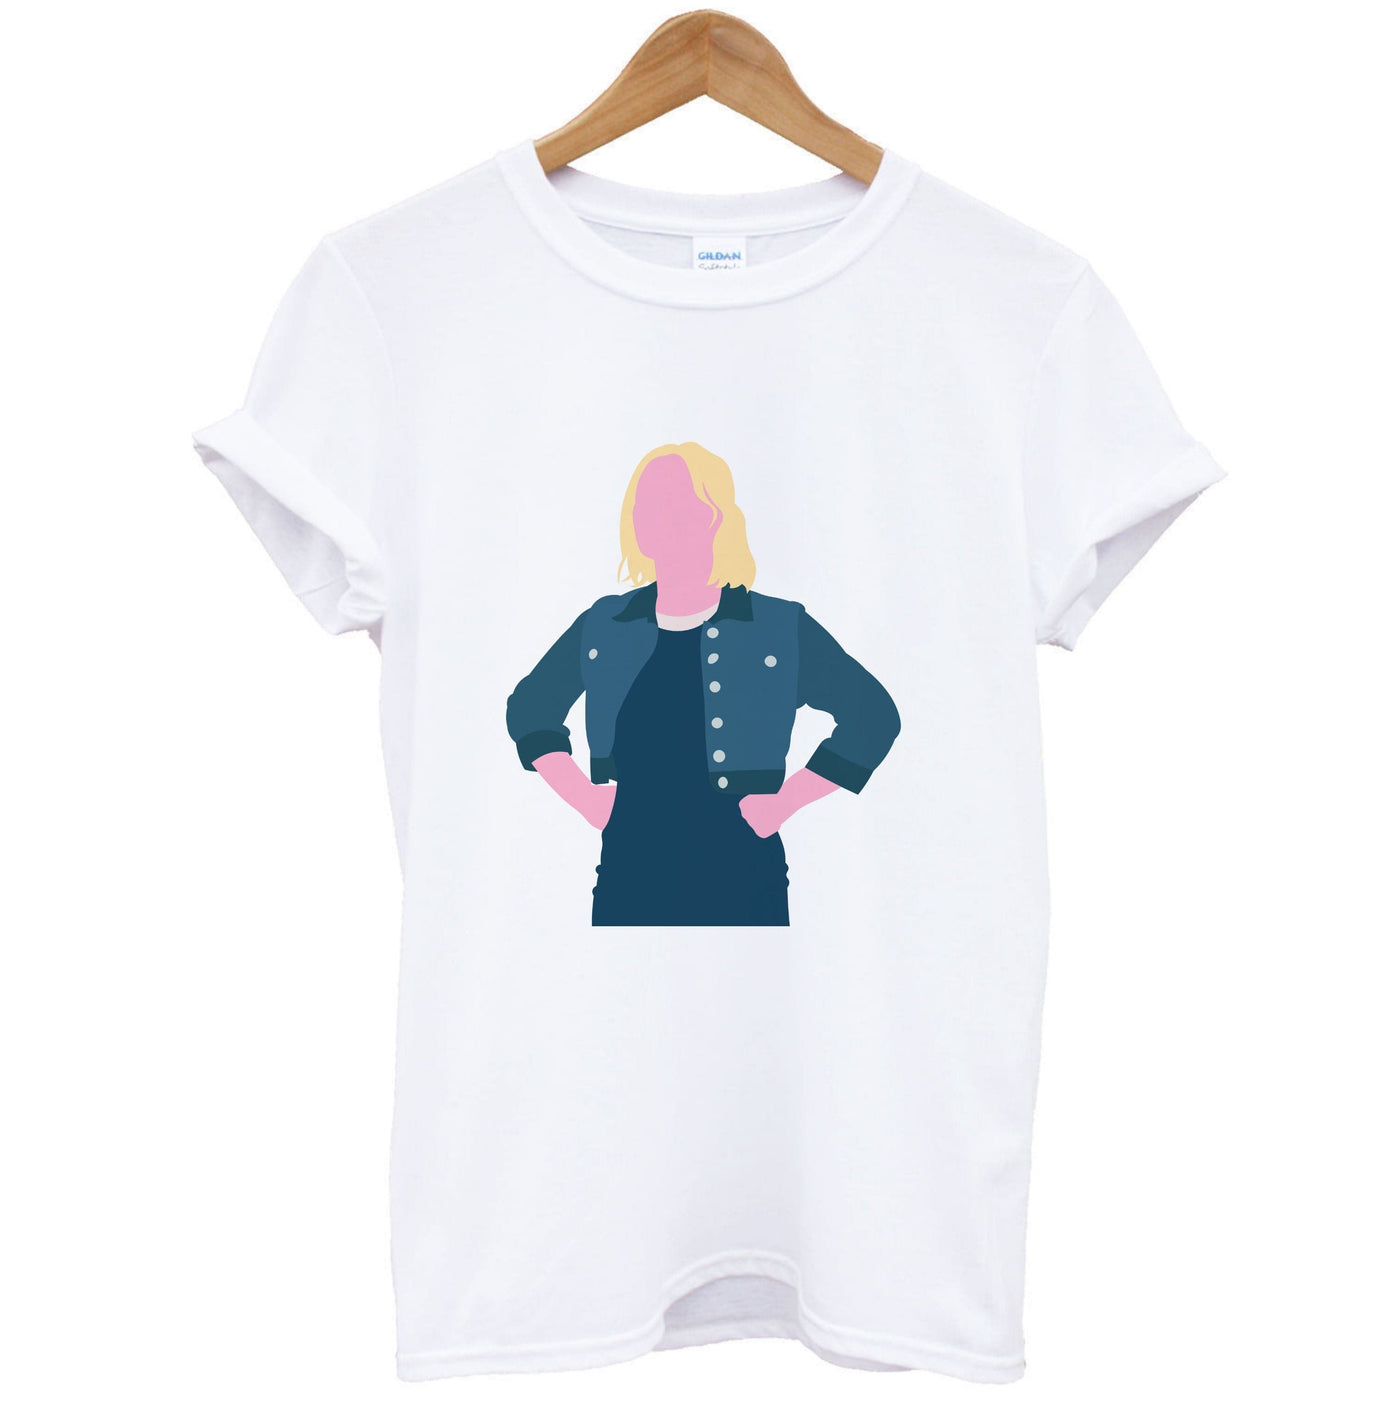 Ruby Sunday - Doctor Who T-Shirt